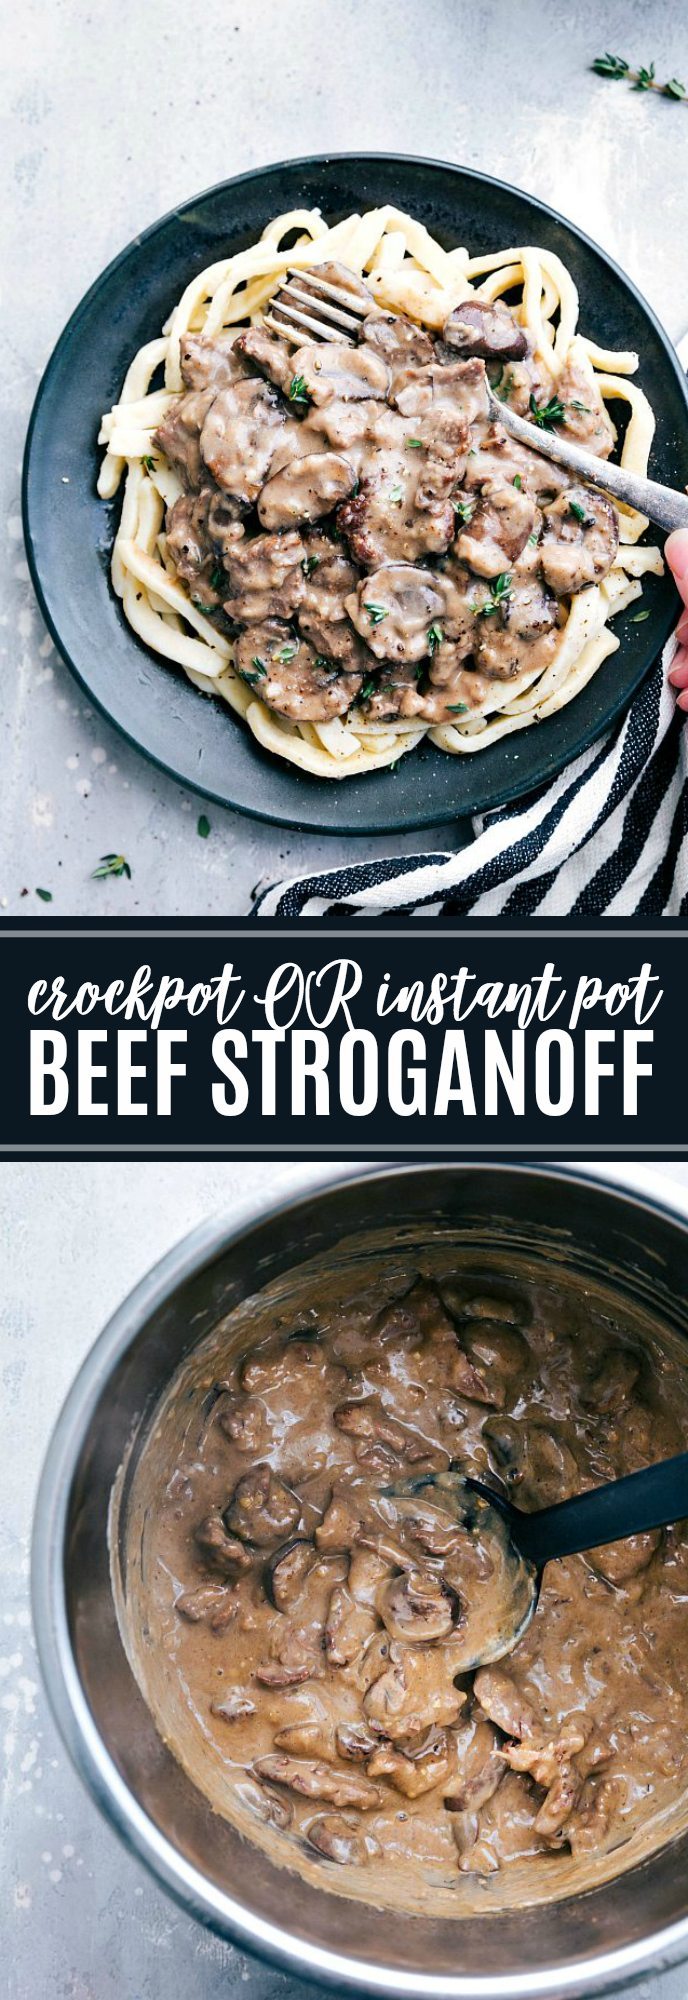 Insanely good BEEF STROGANOFF made in the instant pot OR crockpot. Delicious and easy! via chelseasmessyapron.com | #instantpot #crockpot #slowcooker #beef #stroganoff #delicious #kidfriendly #dinner #quick #30minutes #beef #chuckroast #creamcheese #best #ever